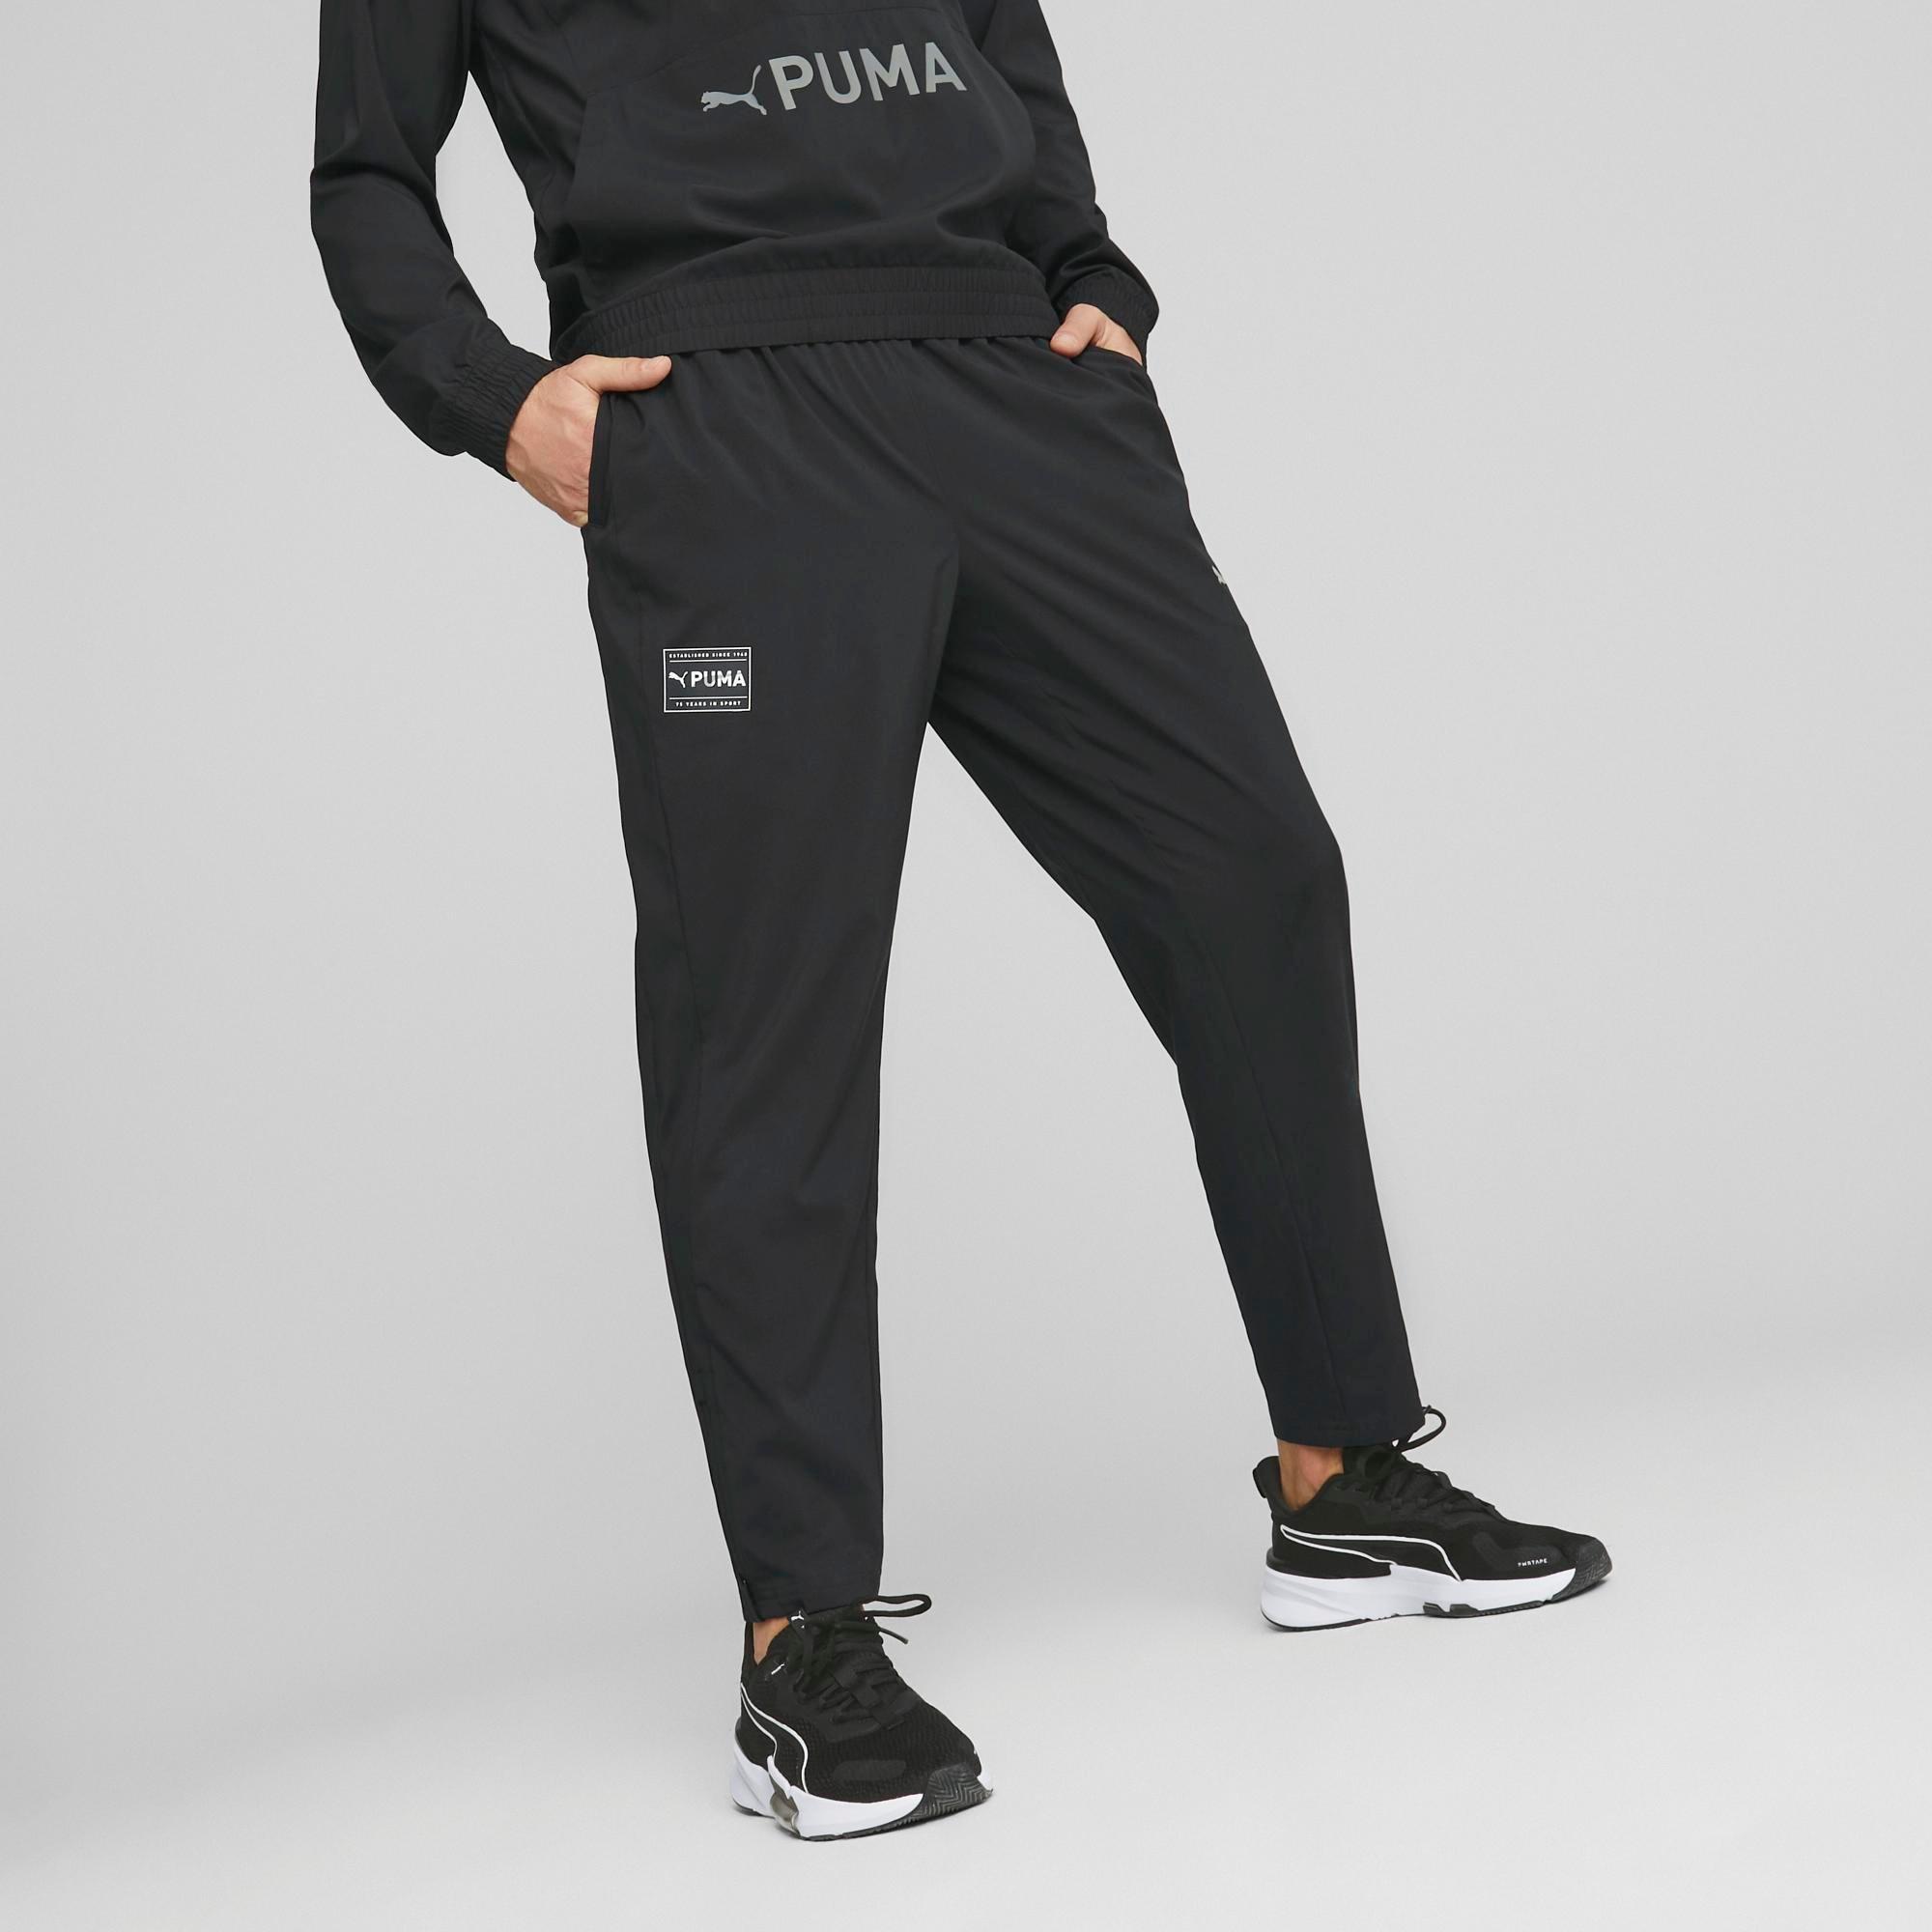 Men's Fit Woven Jogger from Puma